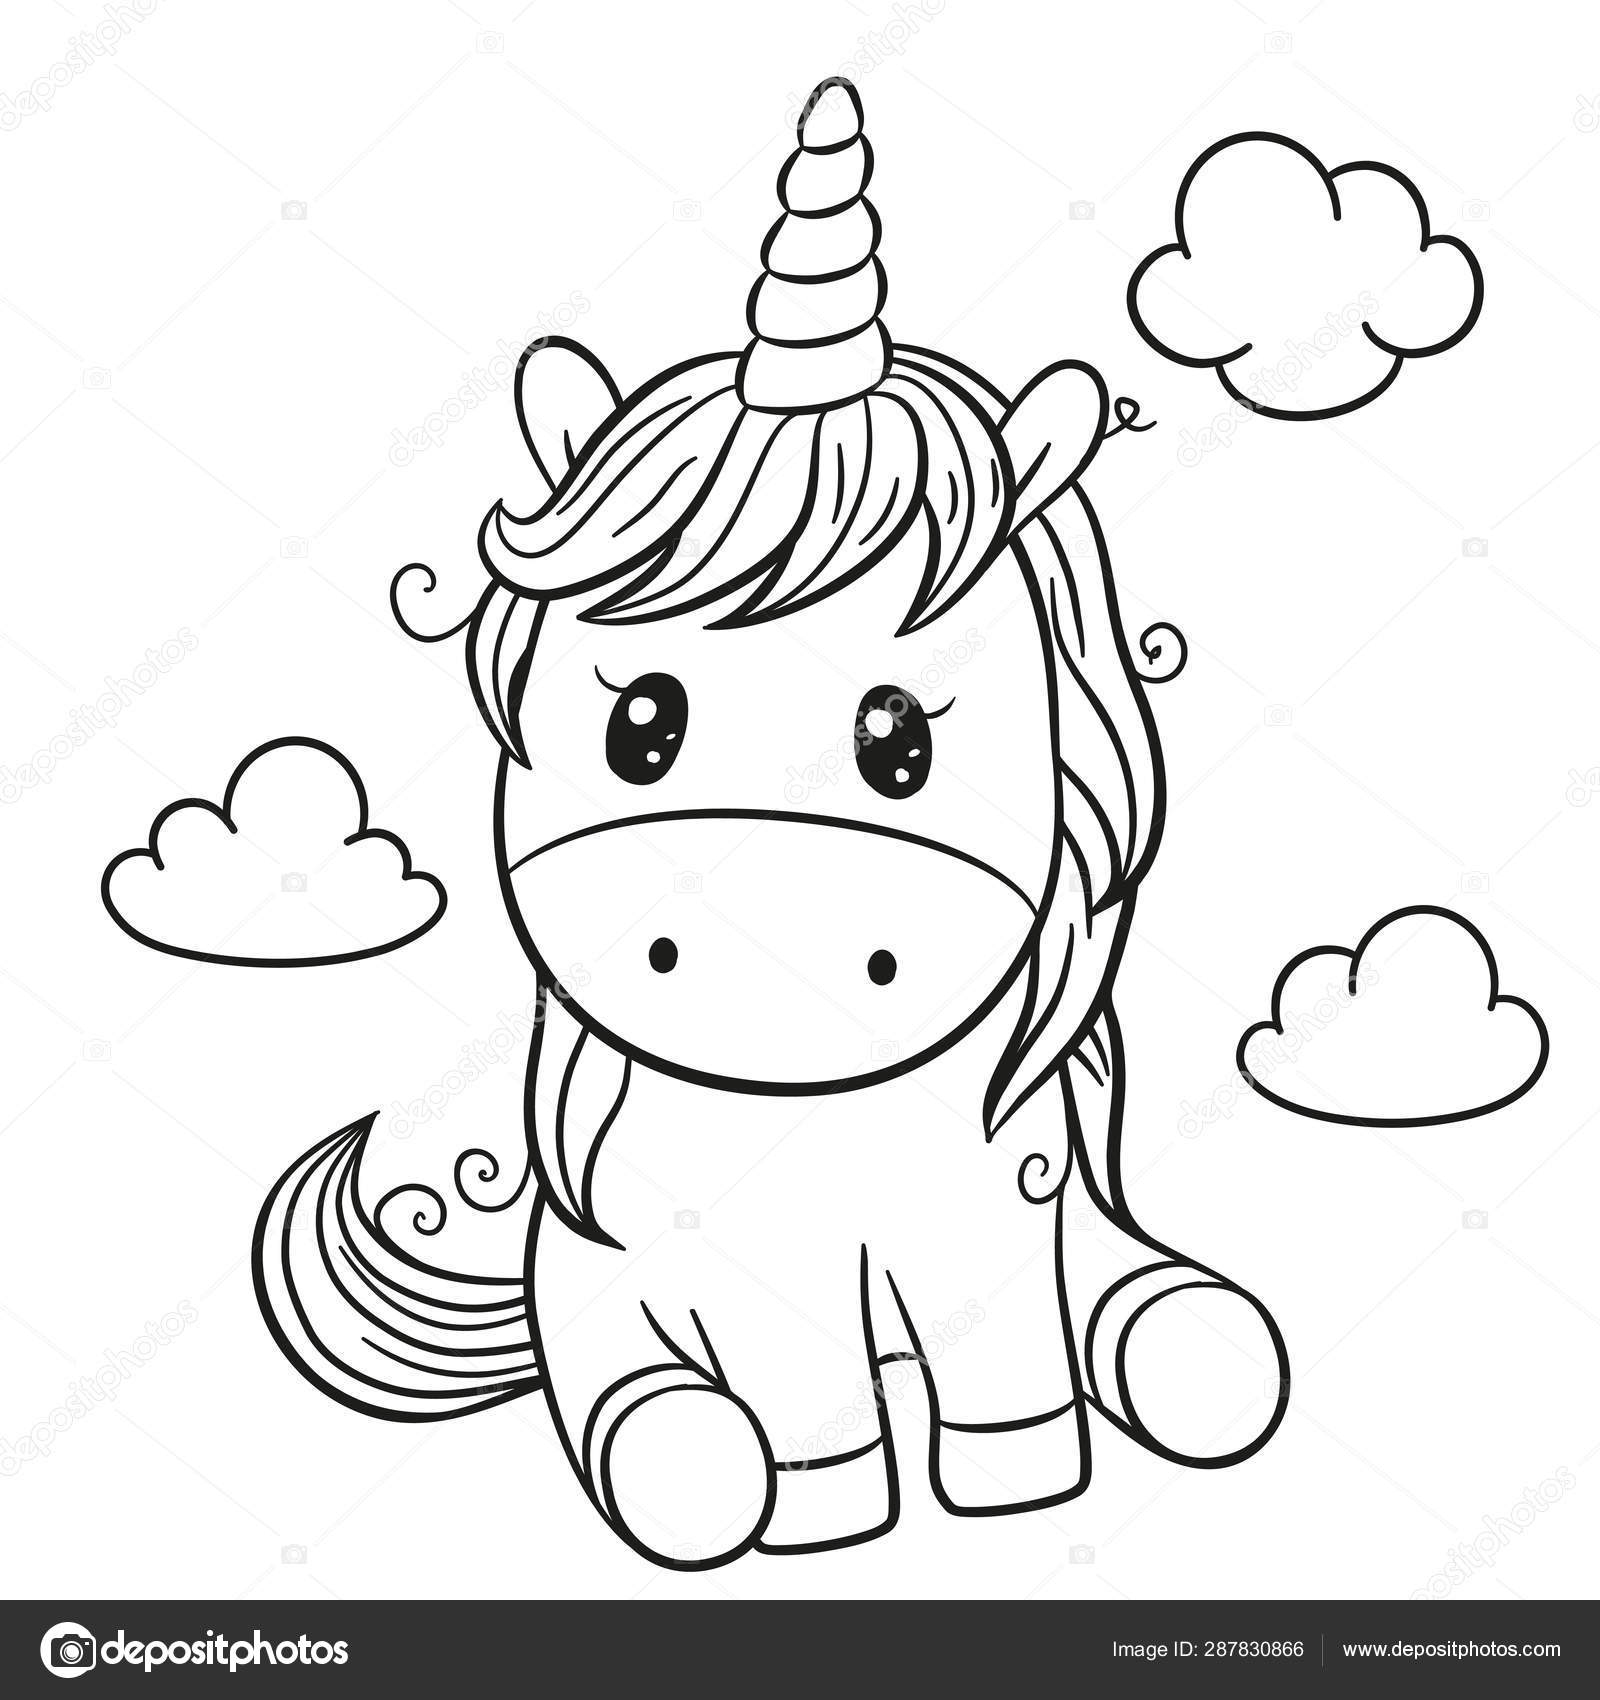 Cartoon Unicorn Outlined For Coloring Book Isolated On A White B